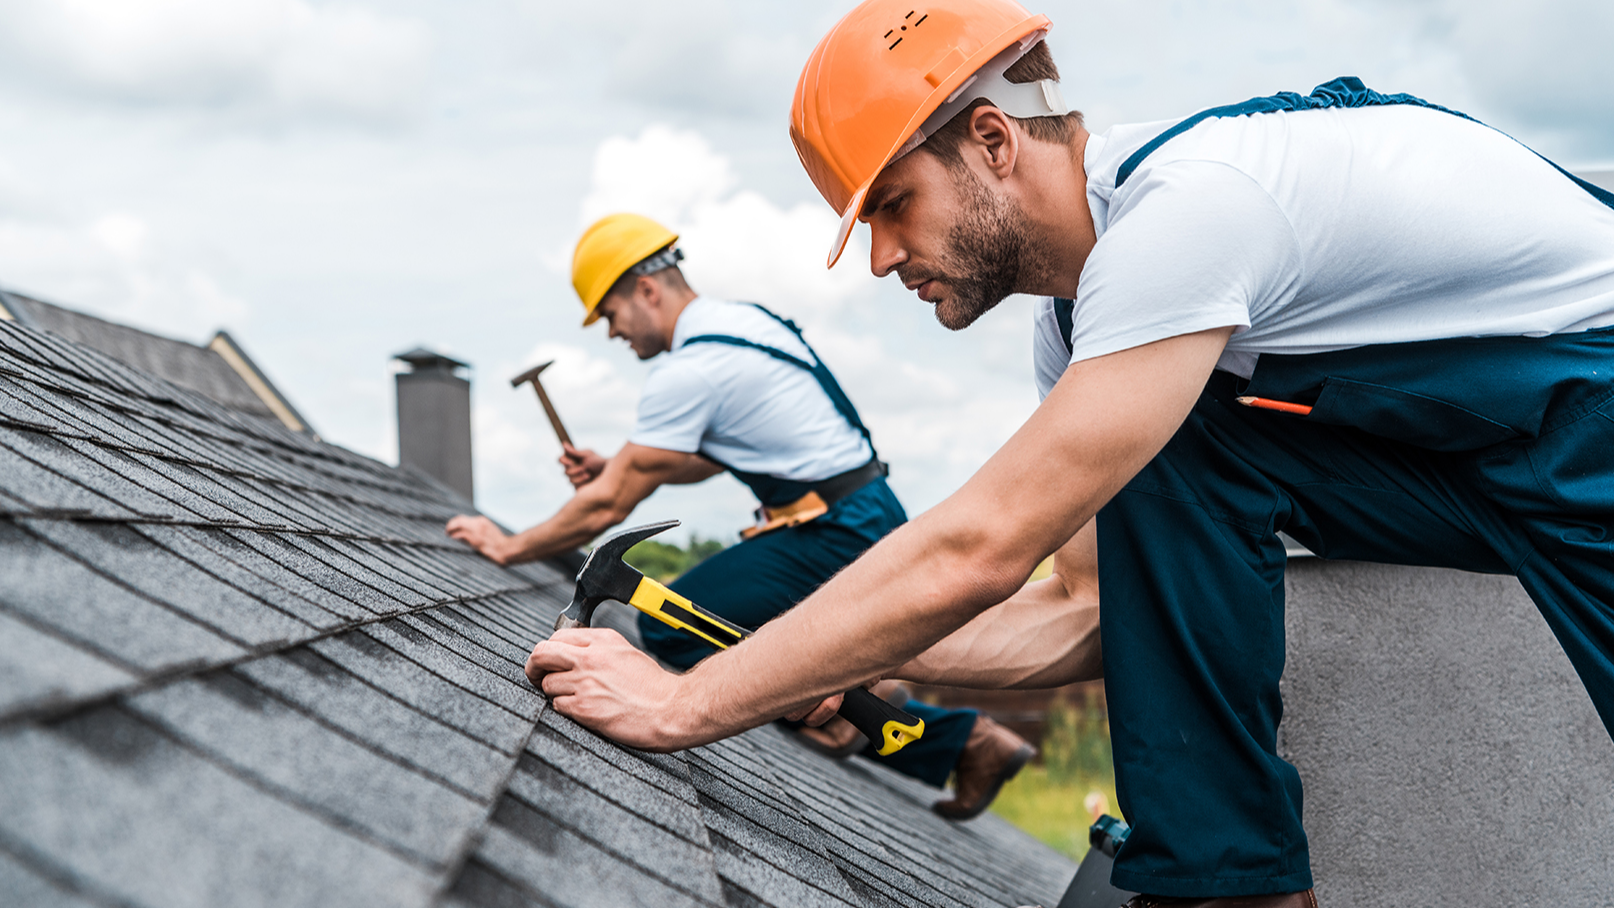 Atlanta Roof Replacement Company Offers Emergency Repair & Insurance Help